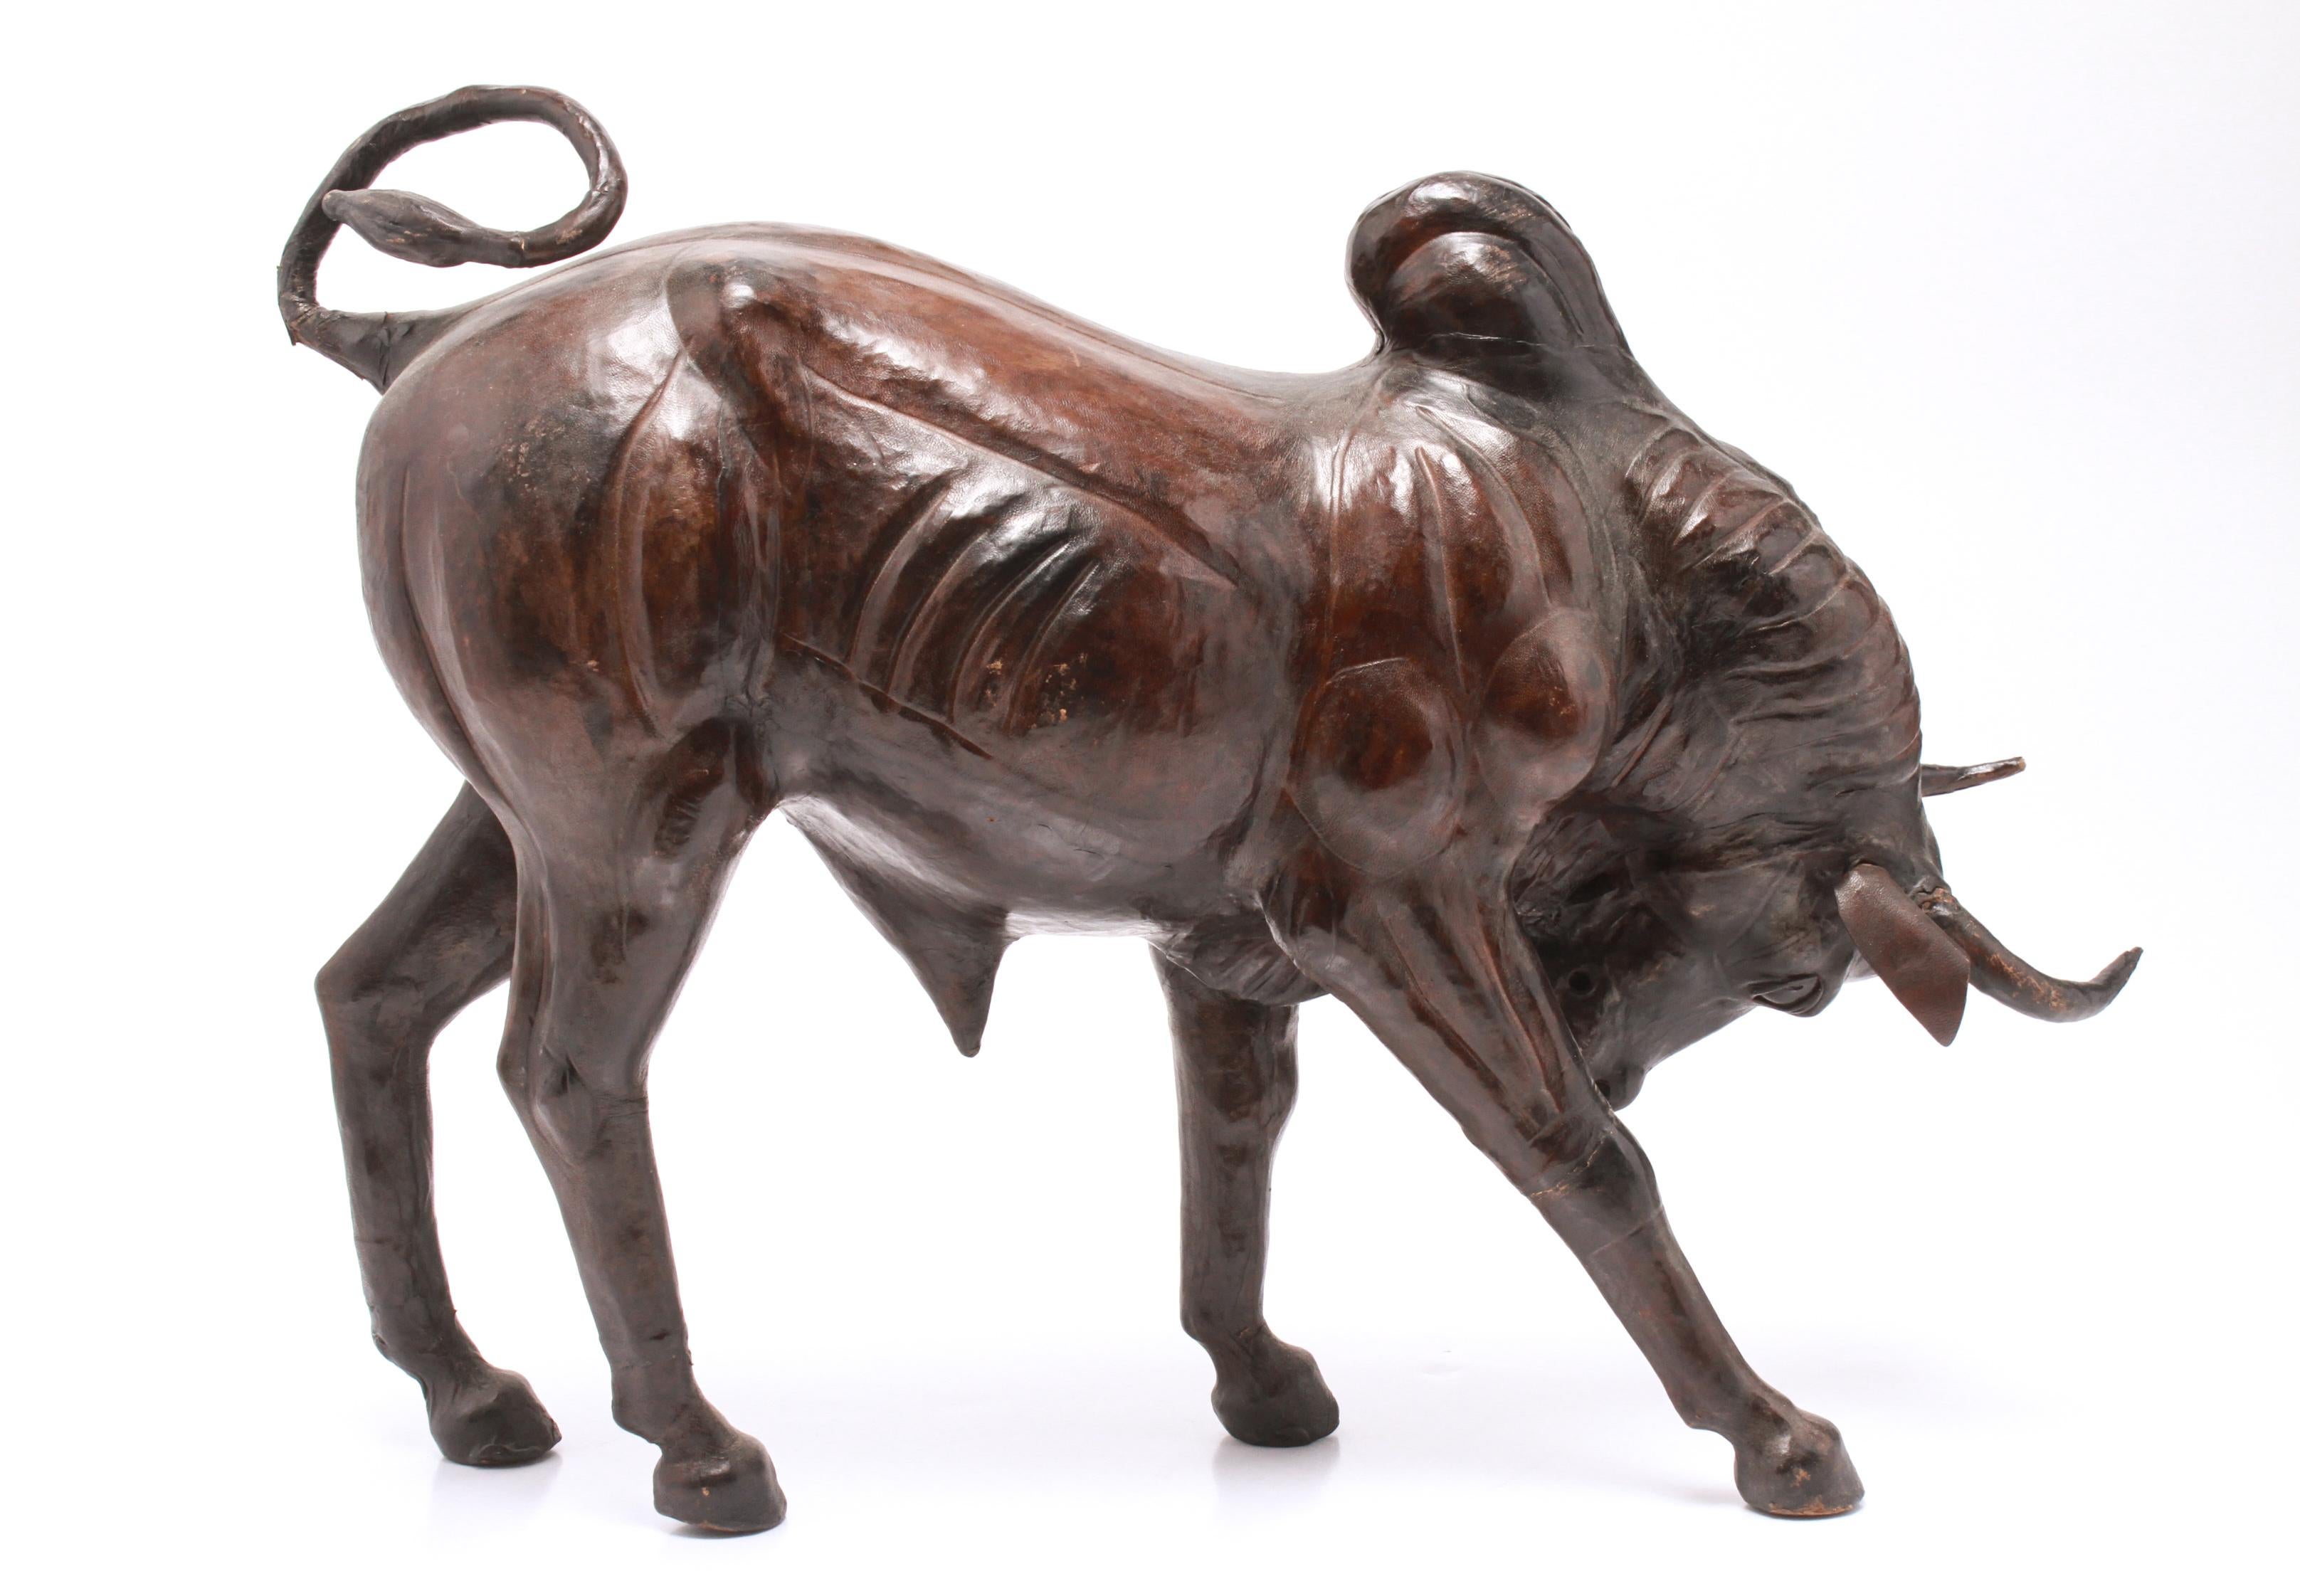 Modern sculpture of a charging Brahma or Brahman bull. The piece is clad in leather and is in great vintage condition with some age cracks in the leather.